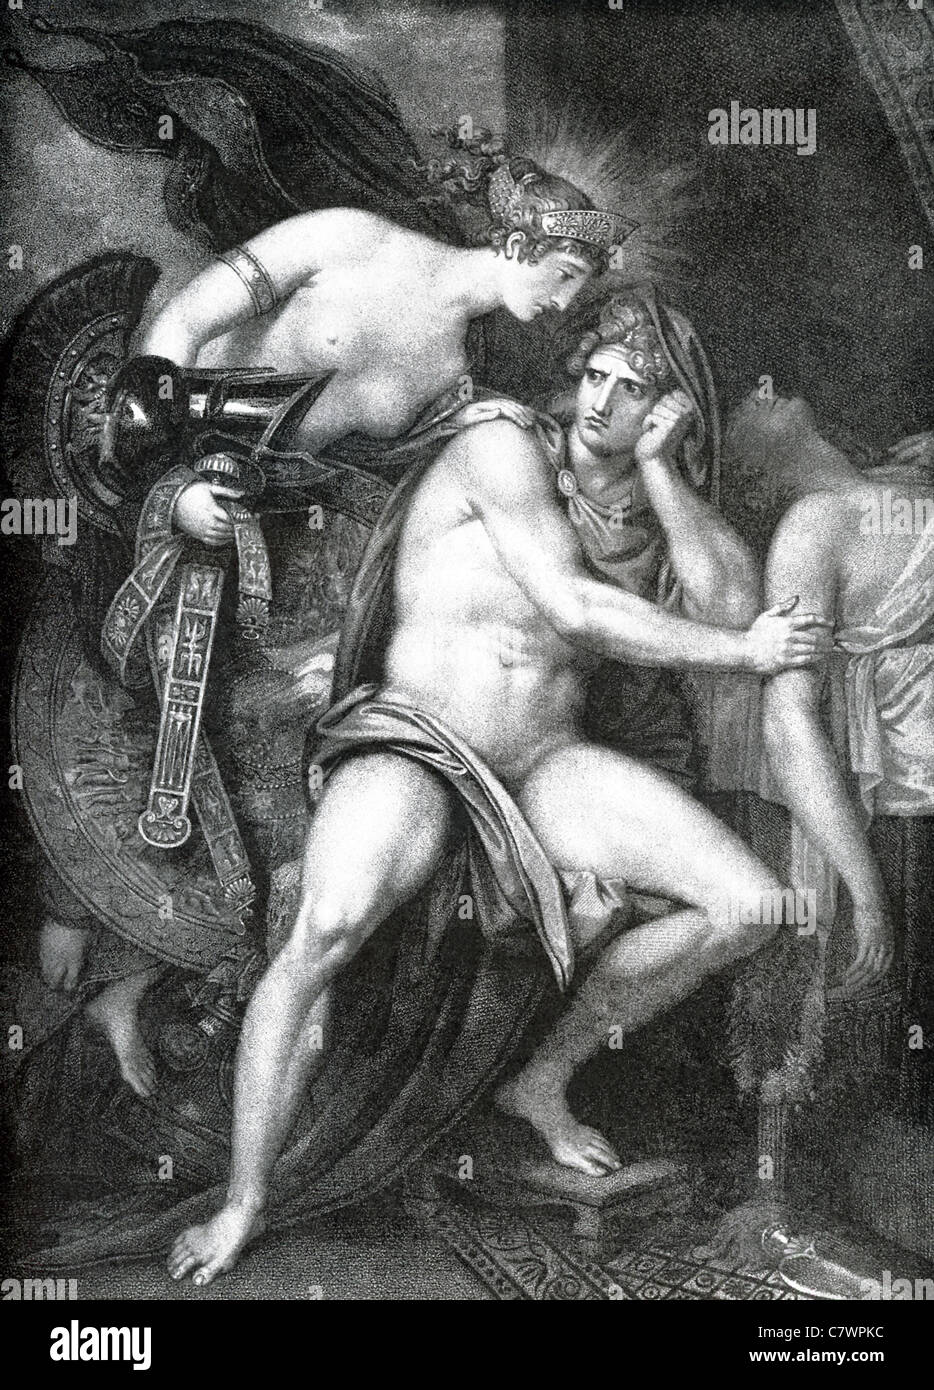 Thetis brings Achilles armor that she had Hephaestus (Vulcan), the god of fire, fashion for him for him to fight in Trojan War. Stock Photo